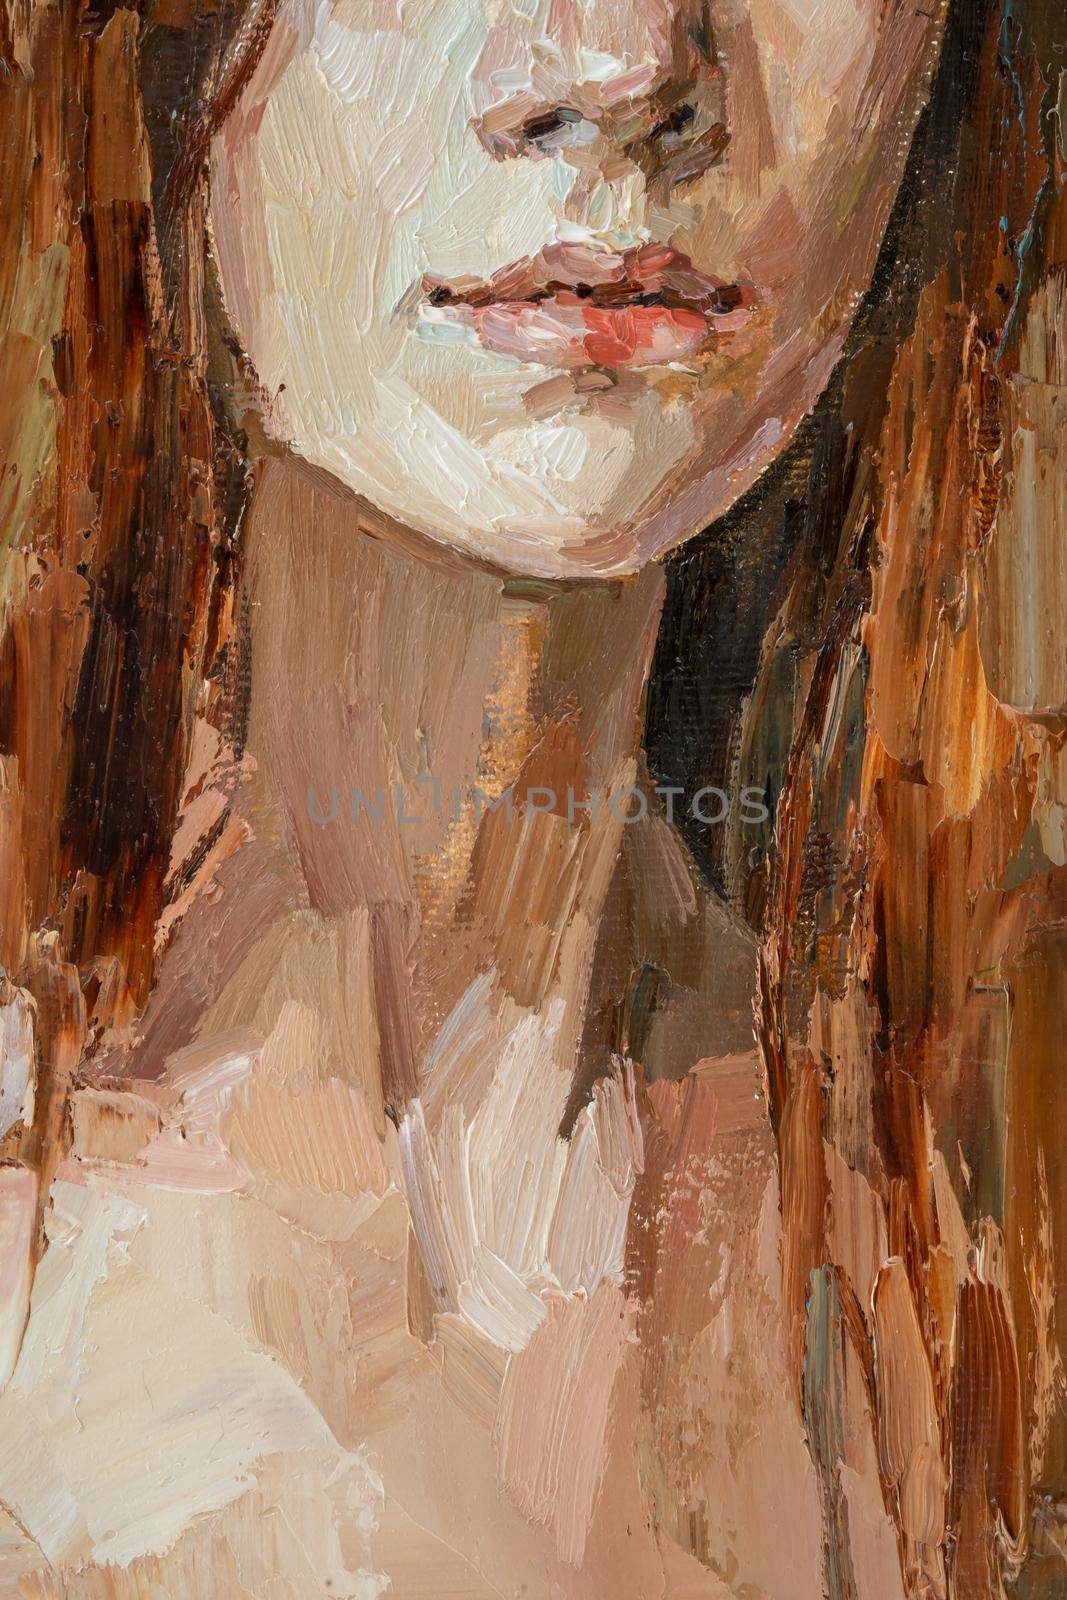 Oil painting. Portrait of a red-haired girl. The art is done in a realistic manner.